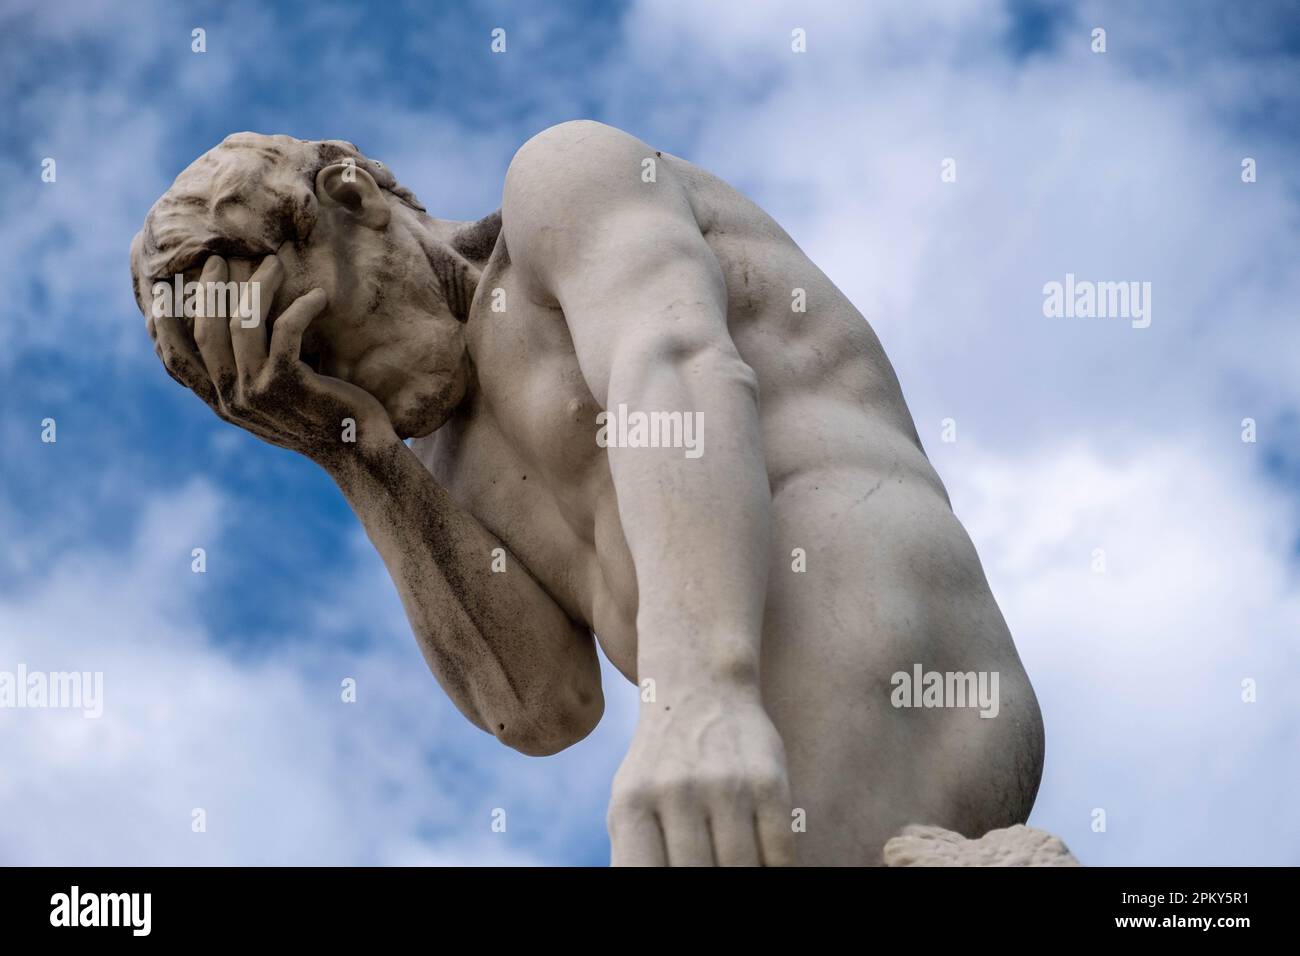 White Stone Statue of Muscular Man with Hand on Face, Against Blue Sky and Clouds Stock Photo